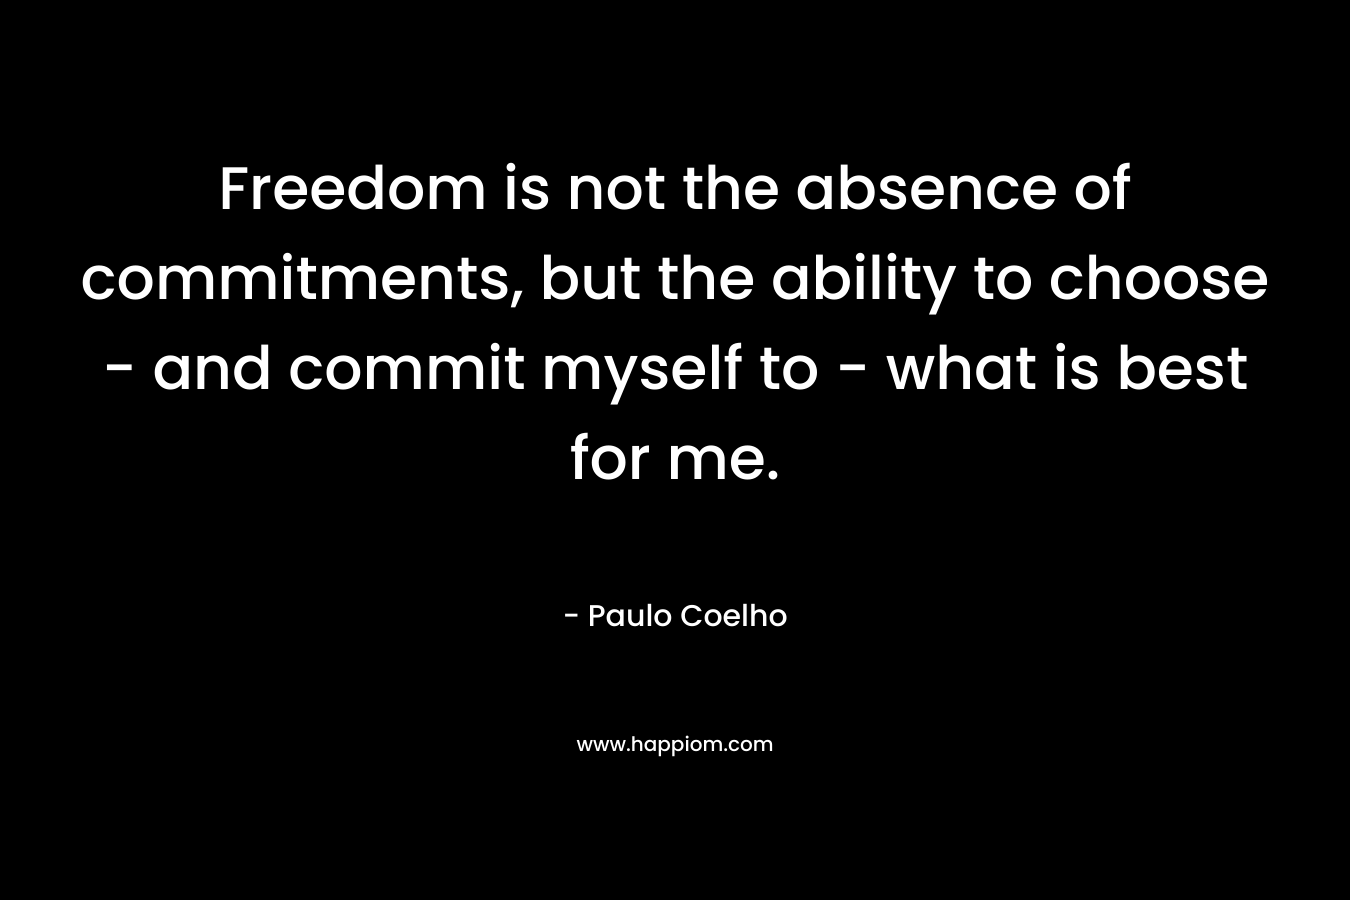 Freedom is not the absence of commitments, but the ability to choose - and commit myself to - what is best for me.